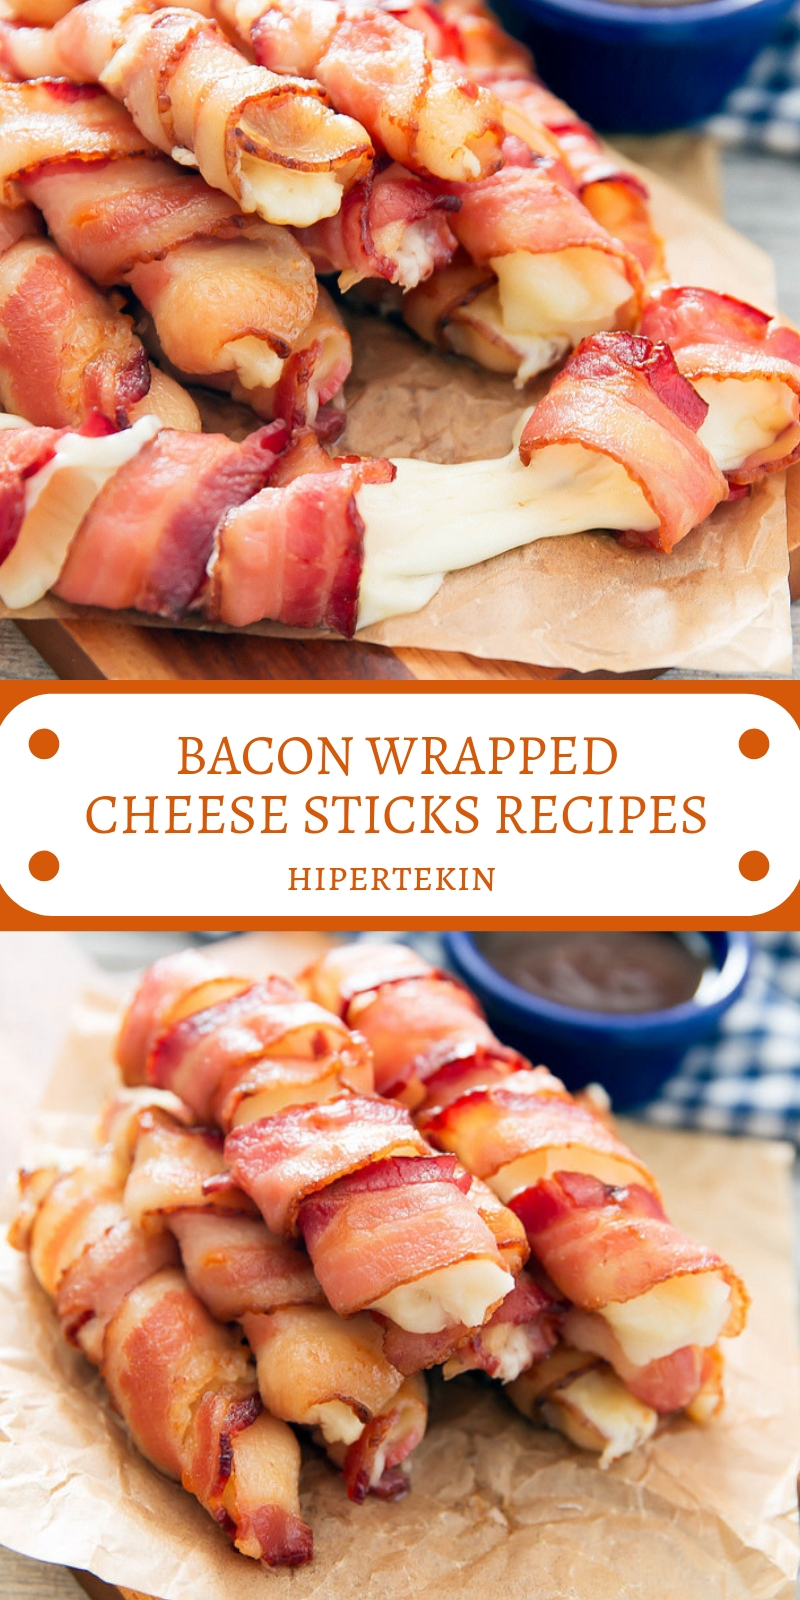 BACON WRAPPED CHEESE STICKS RECIPES